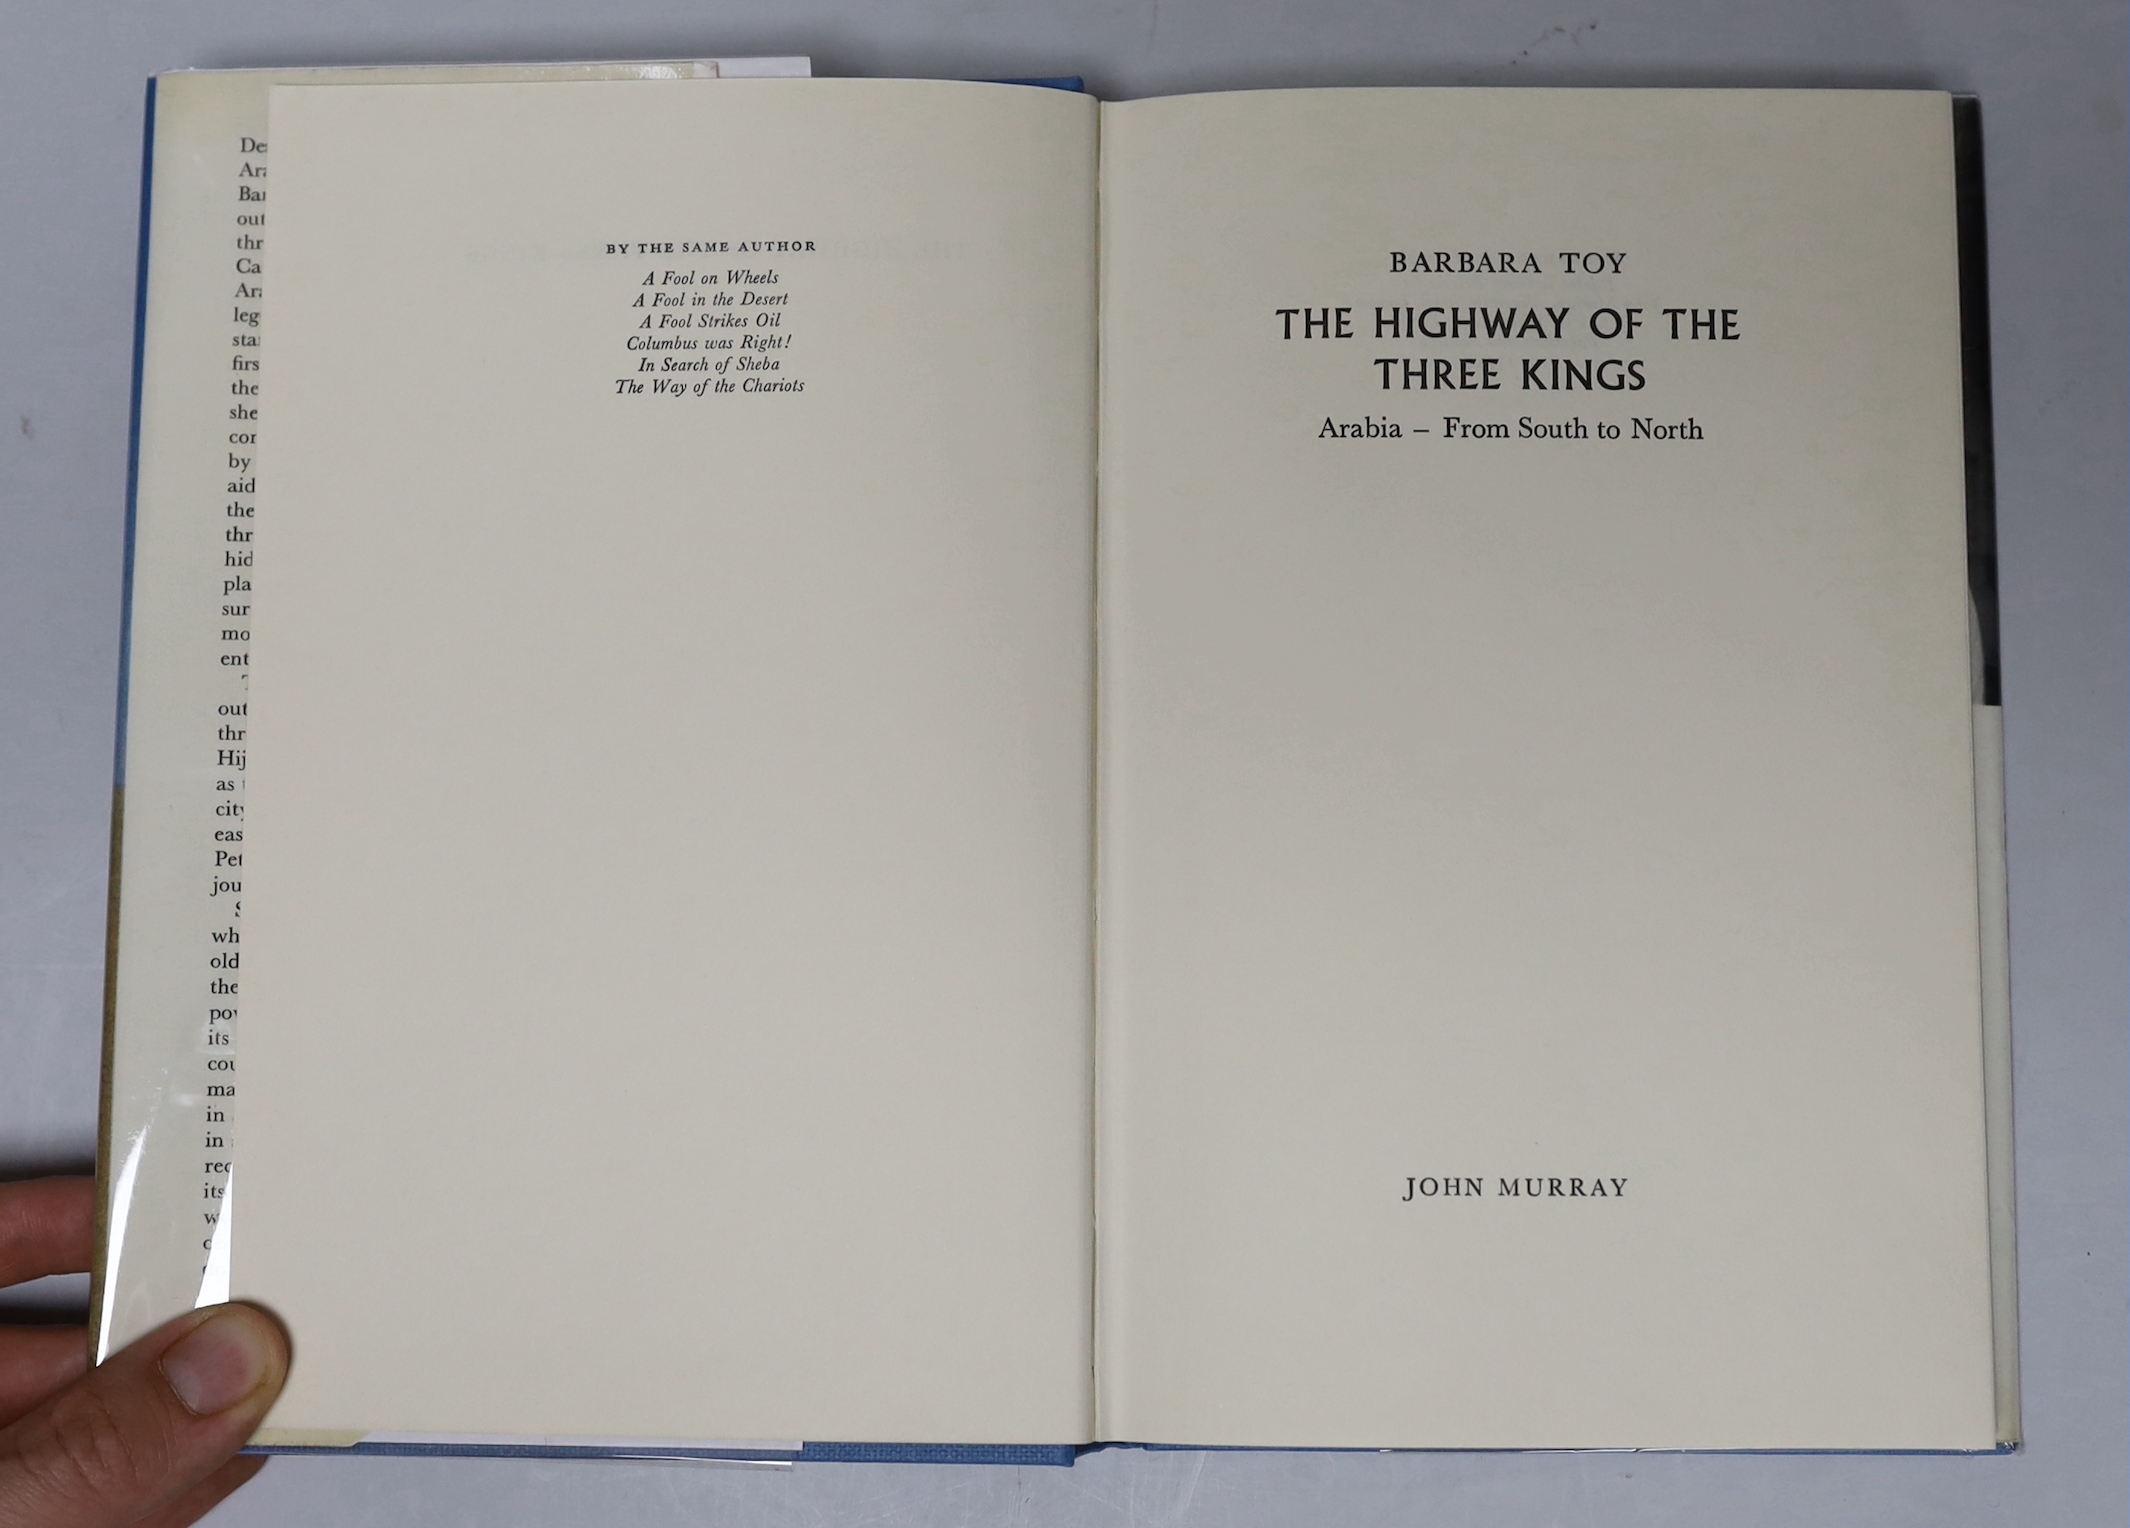 Toy, Barbara - The Highway of the Three Kings, 1st edition, 8vo, blue cloth, in illustrated price-clipped d/j, with two route maps (one double page), John Murray, London, 1968.